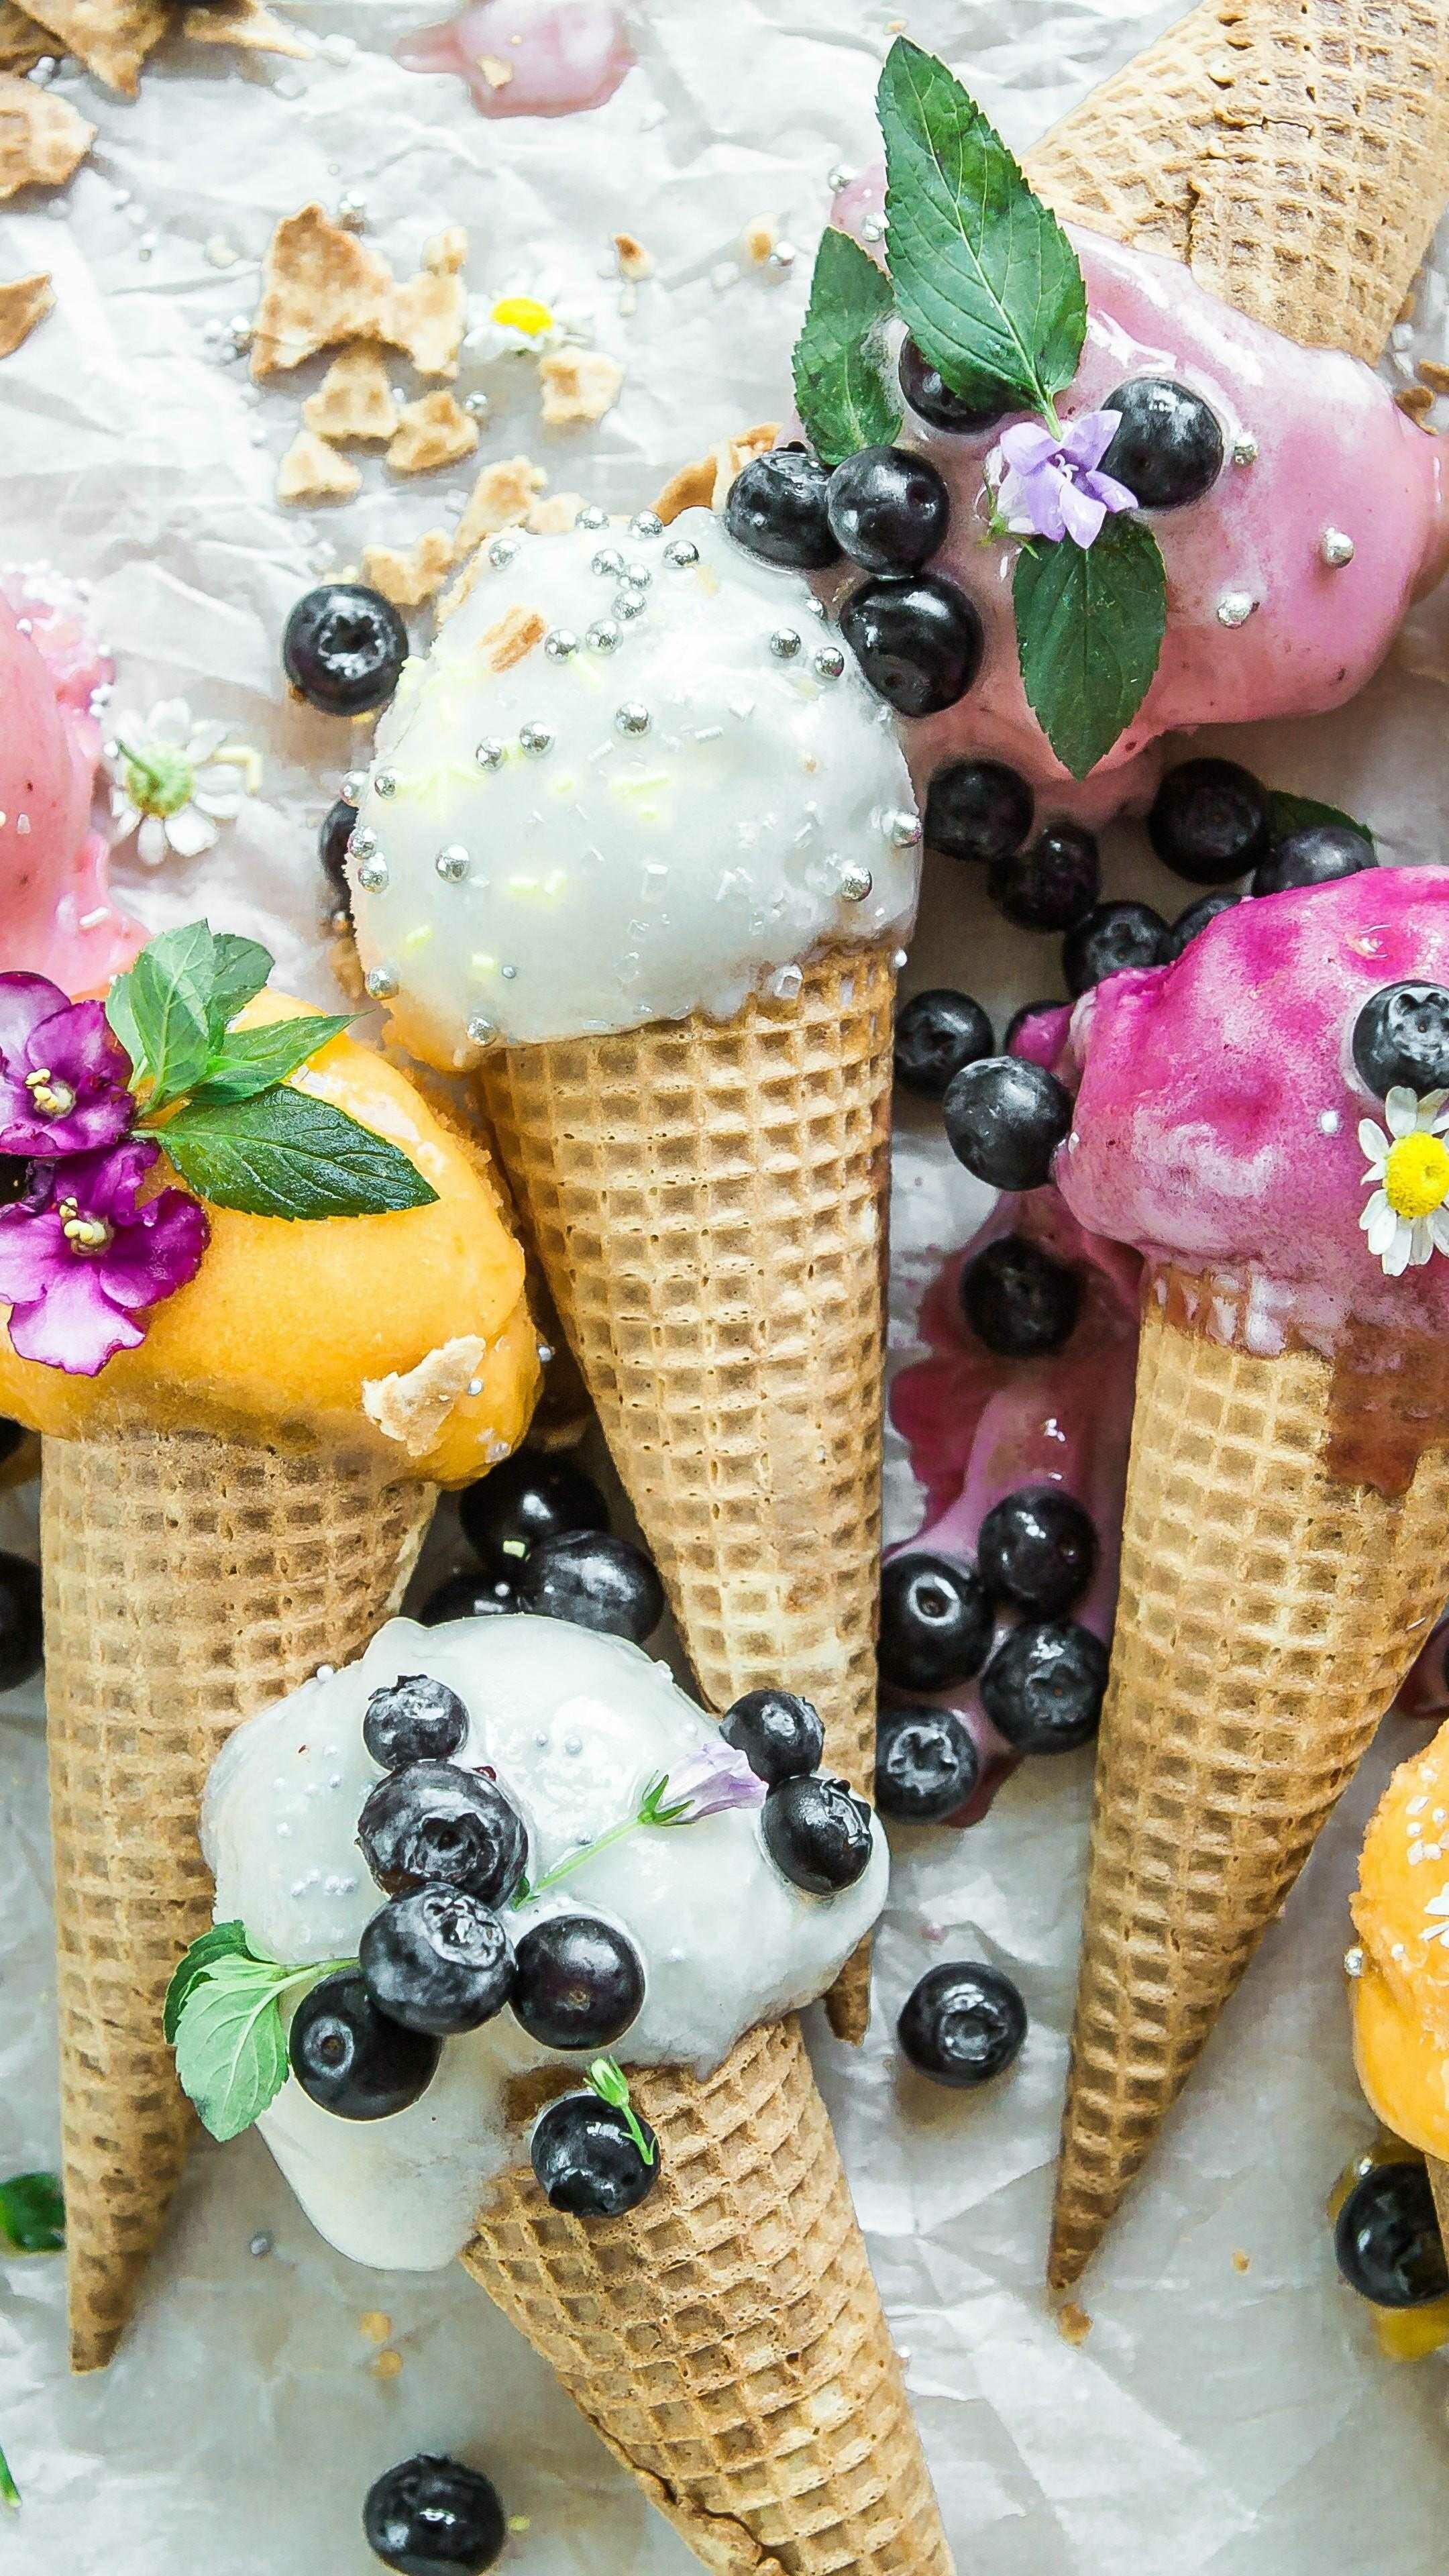 Ice Cream: Made from milk or cream and is flavored with a sweetener, either sugar or an alternative, and spice, such as cocoa or vanilla, or with fruit such as strawberries or peaches. 2160x3840 4K Background.